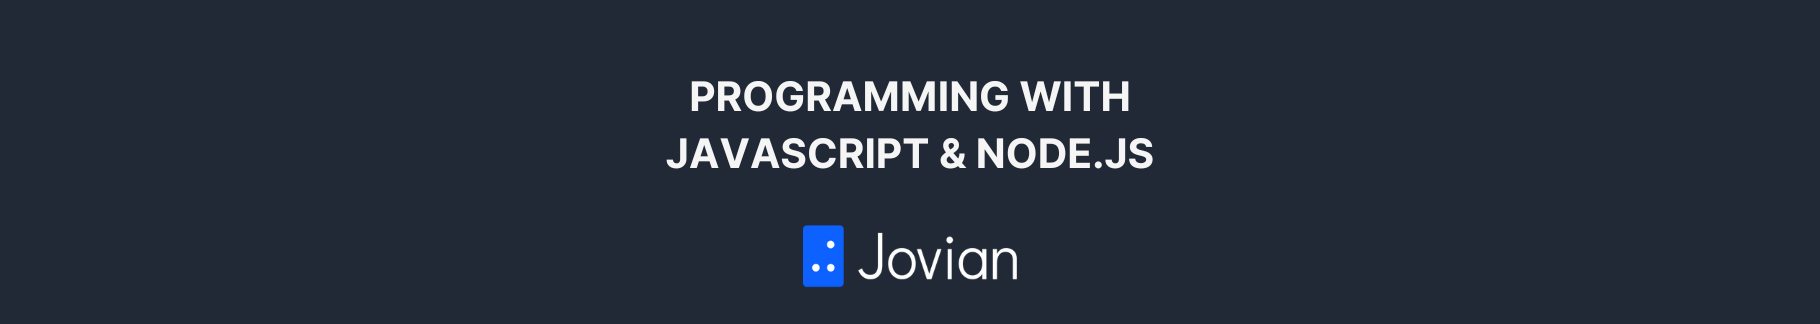 Programming with JavaScript and Node.js